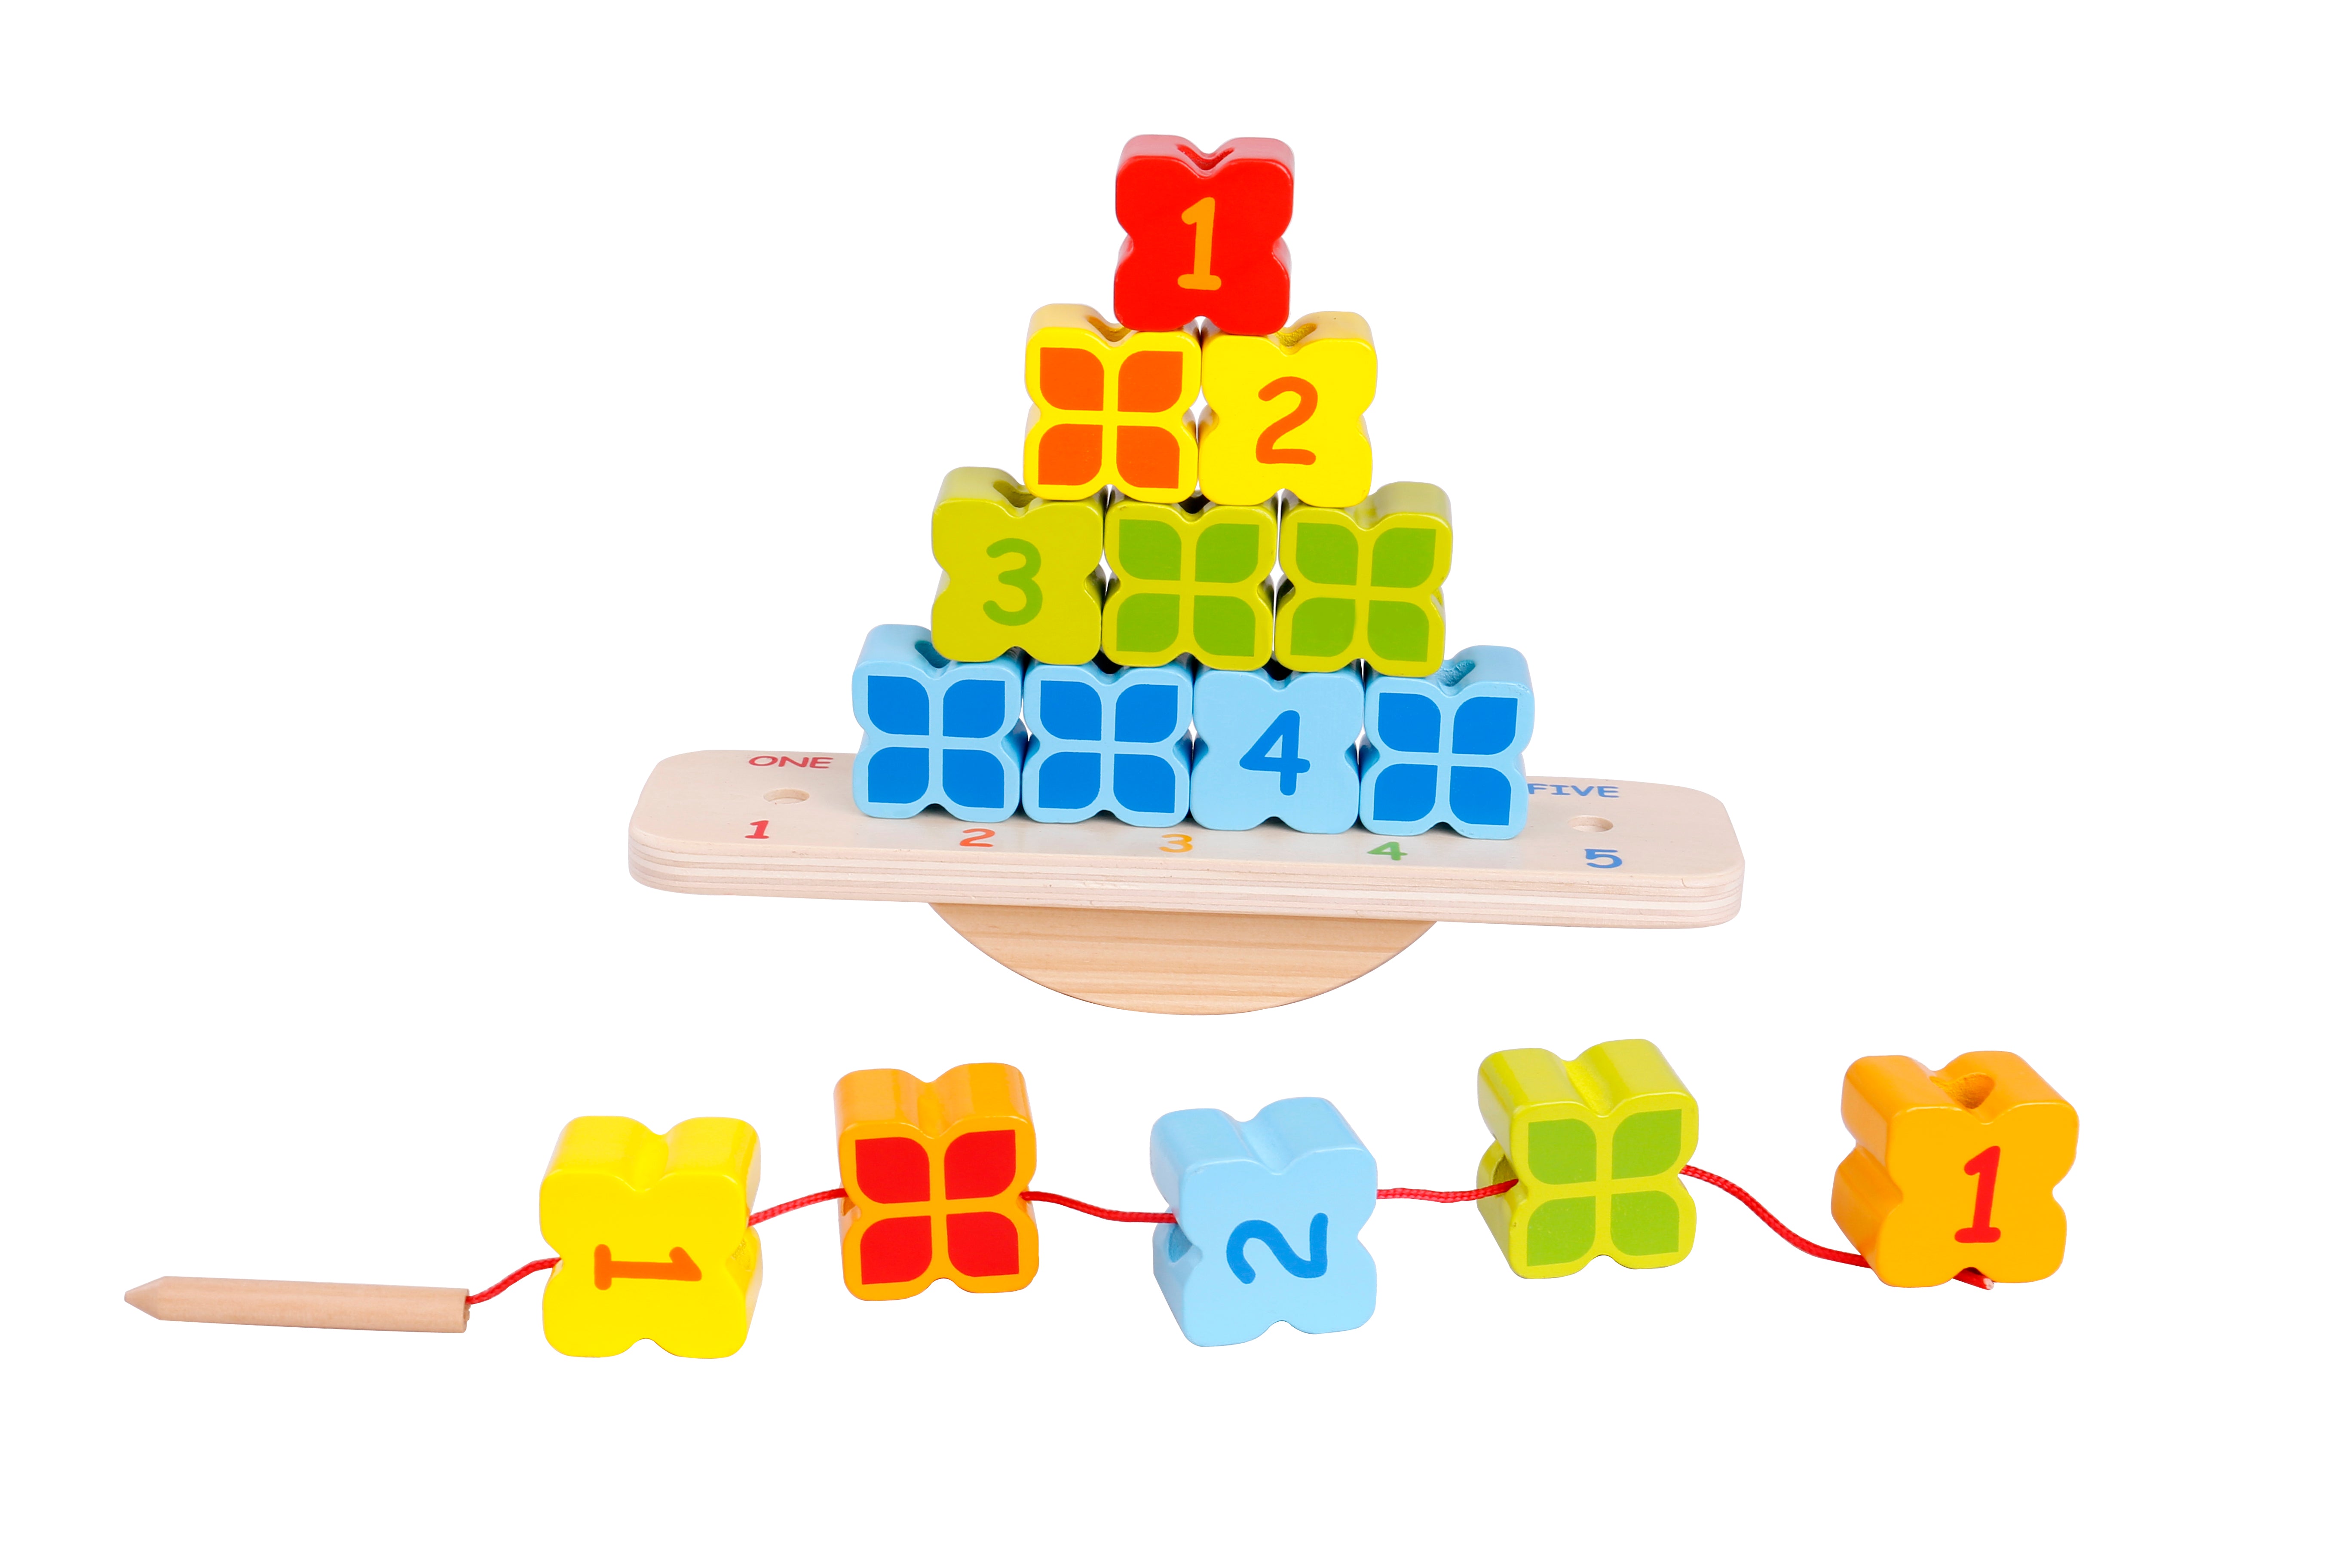 Toysters Wooden Moon Balancing Game and Stacking Blocks